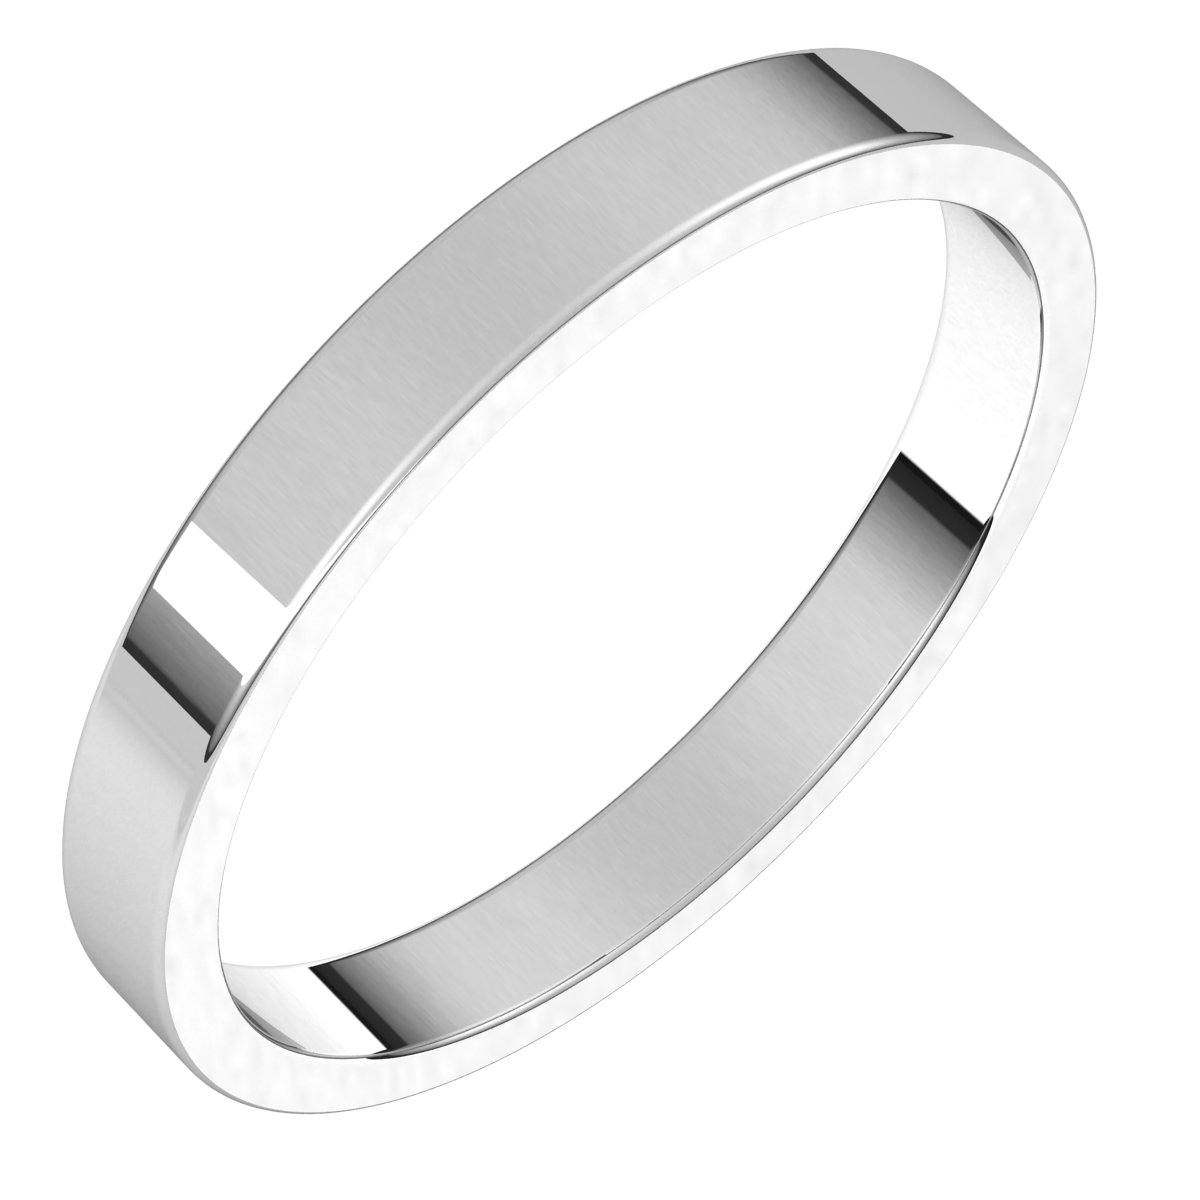 Continuum Sterling Silver 2.5 mm Flat Band Size 10.5 Ref 16602516